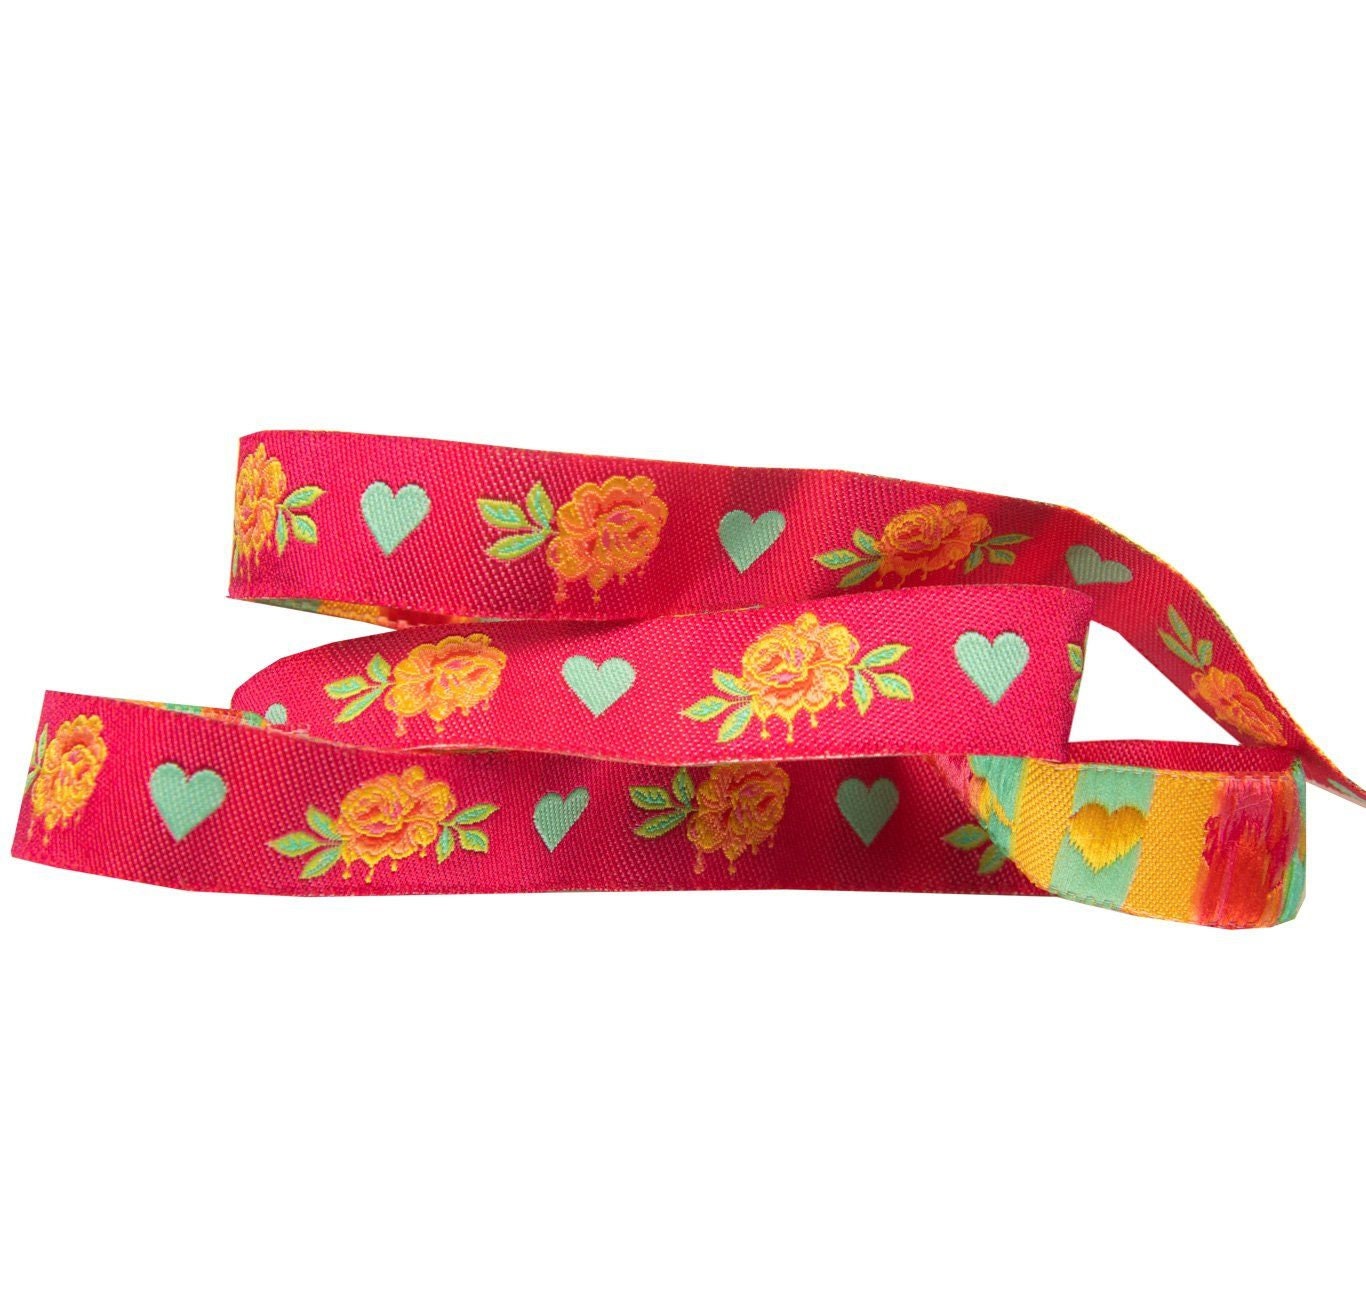 Tula Pink Curiouser & Curiouser Ribbon Priced Per Yard 5/8 Inch Painted Roses Pink TK 7116mm Col 2c Woven Ribbon